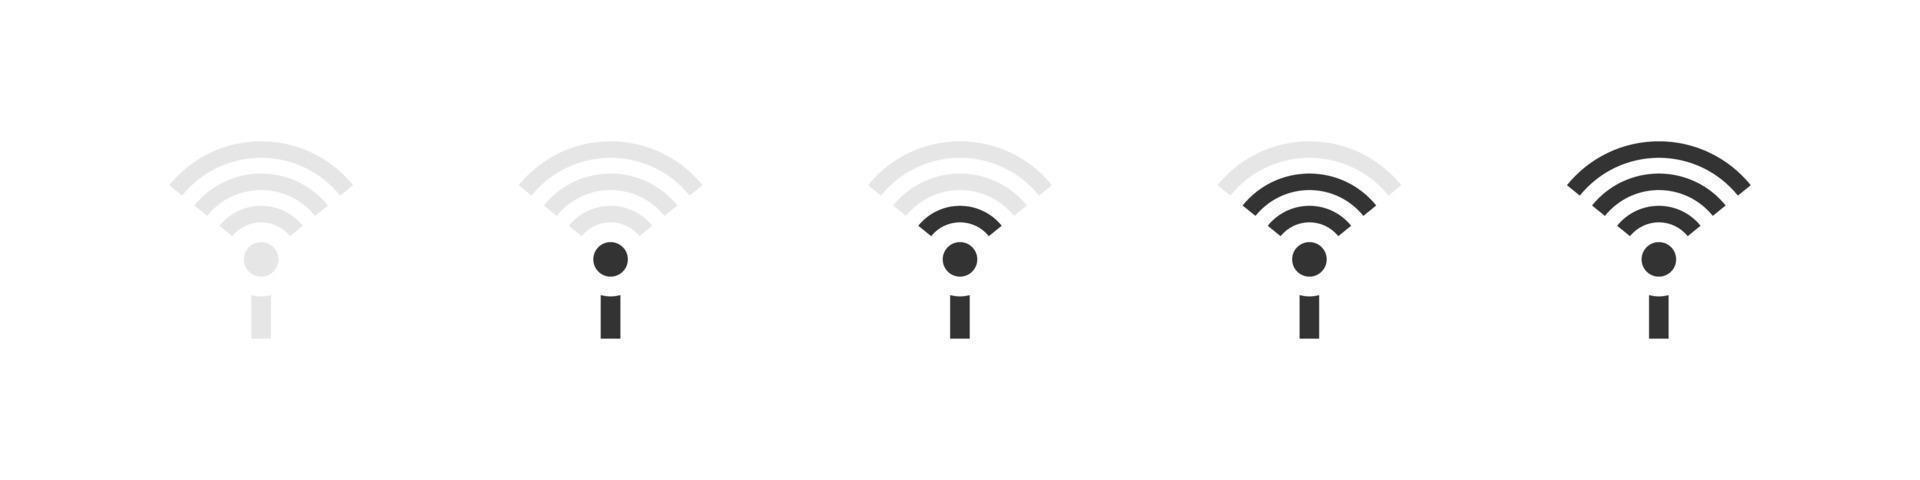 Antena WiFi sign set. Wifi icons concept. Wireless internet sign flat style. Simple Icons. Vector illustration